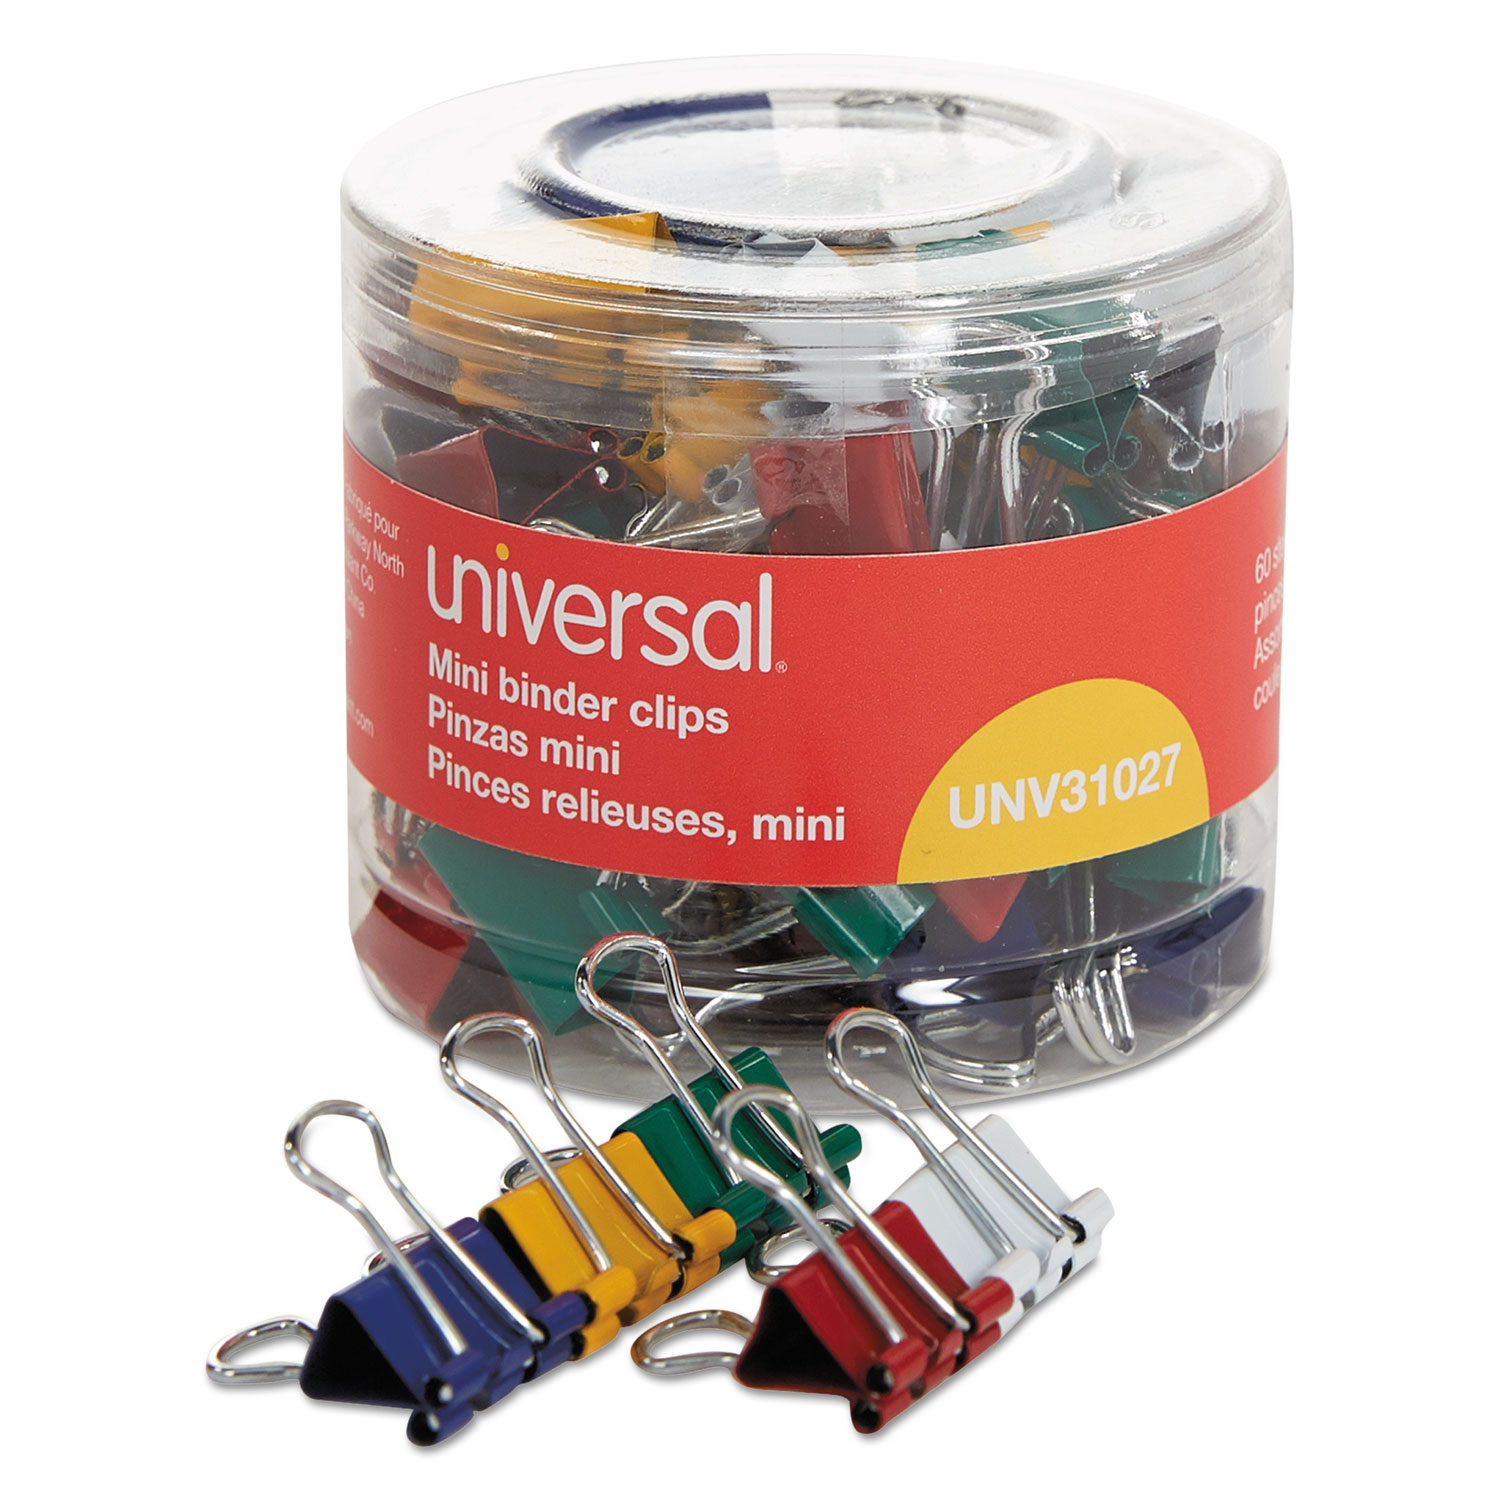  Universal UNV31027 Binder Clips in Dispenser Tub, Mini, Assorted Colors, 60/Pack (UNV31027) 